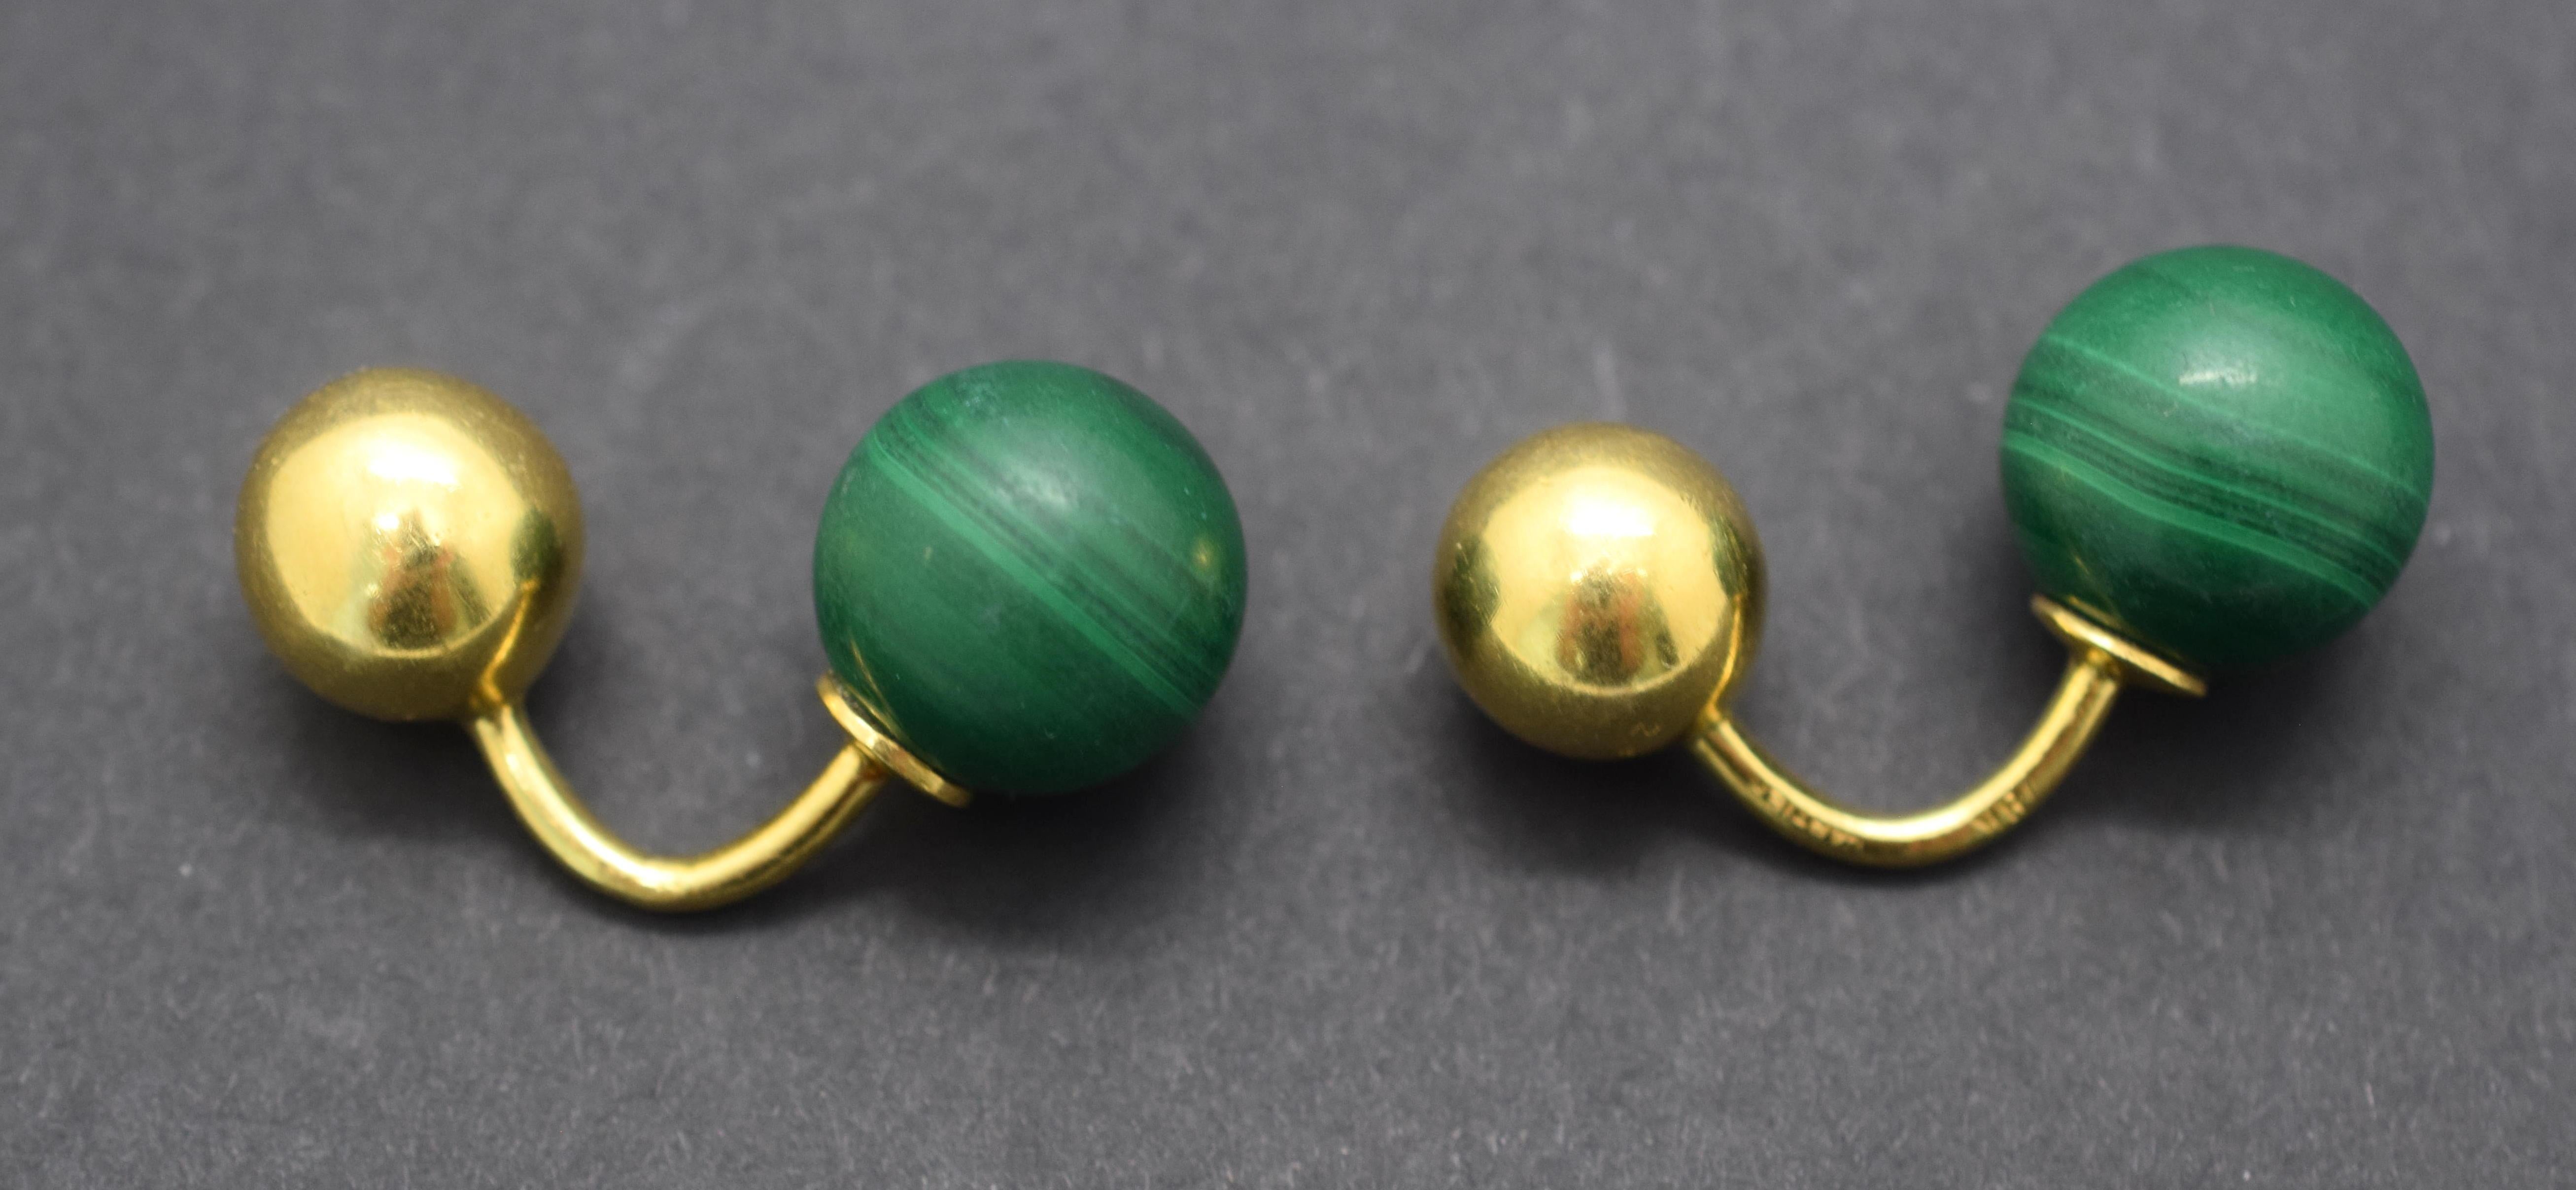 Gorgeous pair of CARTIER cuff links. The pair is set in 18 karat yellow gold. The focal point of the pair are two Malachite gemstones. The Malachite is cut into balls which give the pair a unique look that stand out and gives this pair an